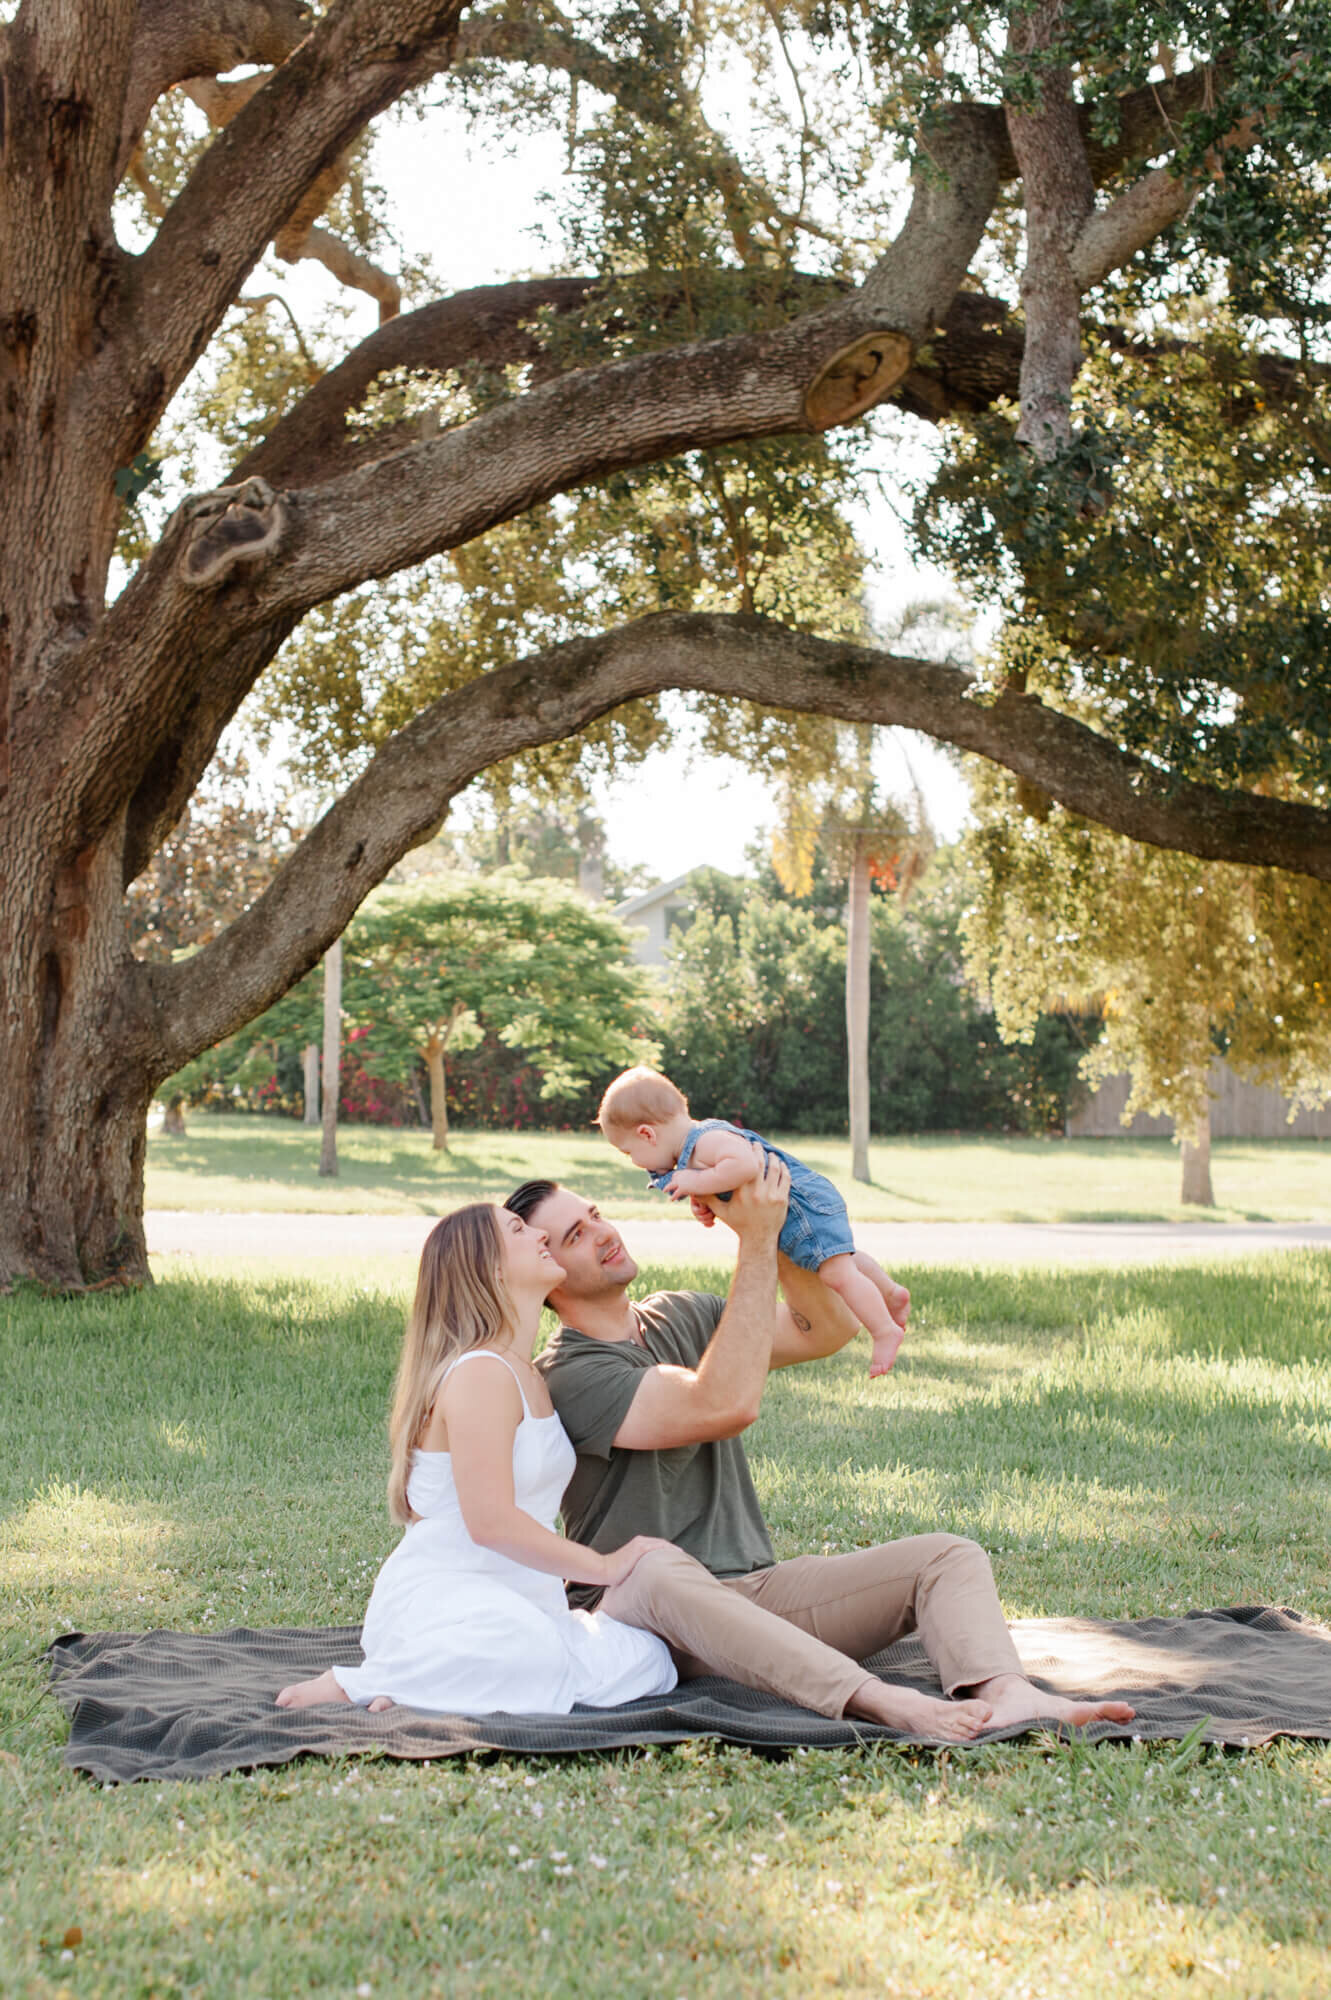 Family sitting under an old oak tree and holding their son in the air and smiling at him.